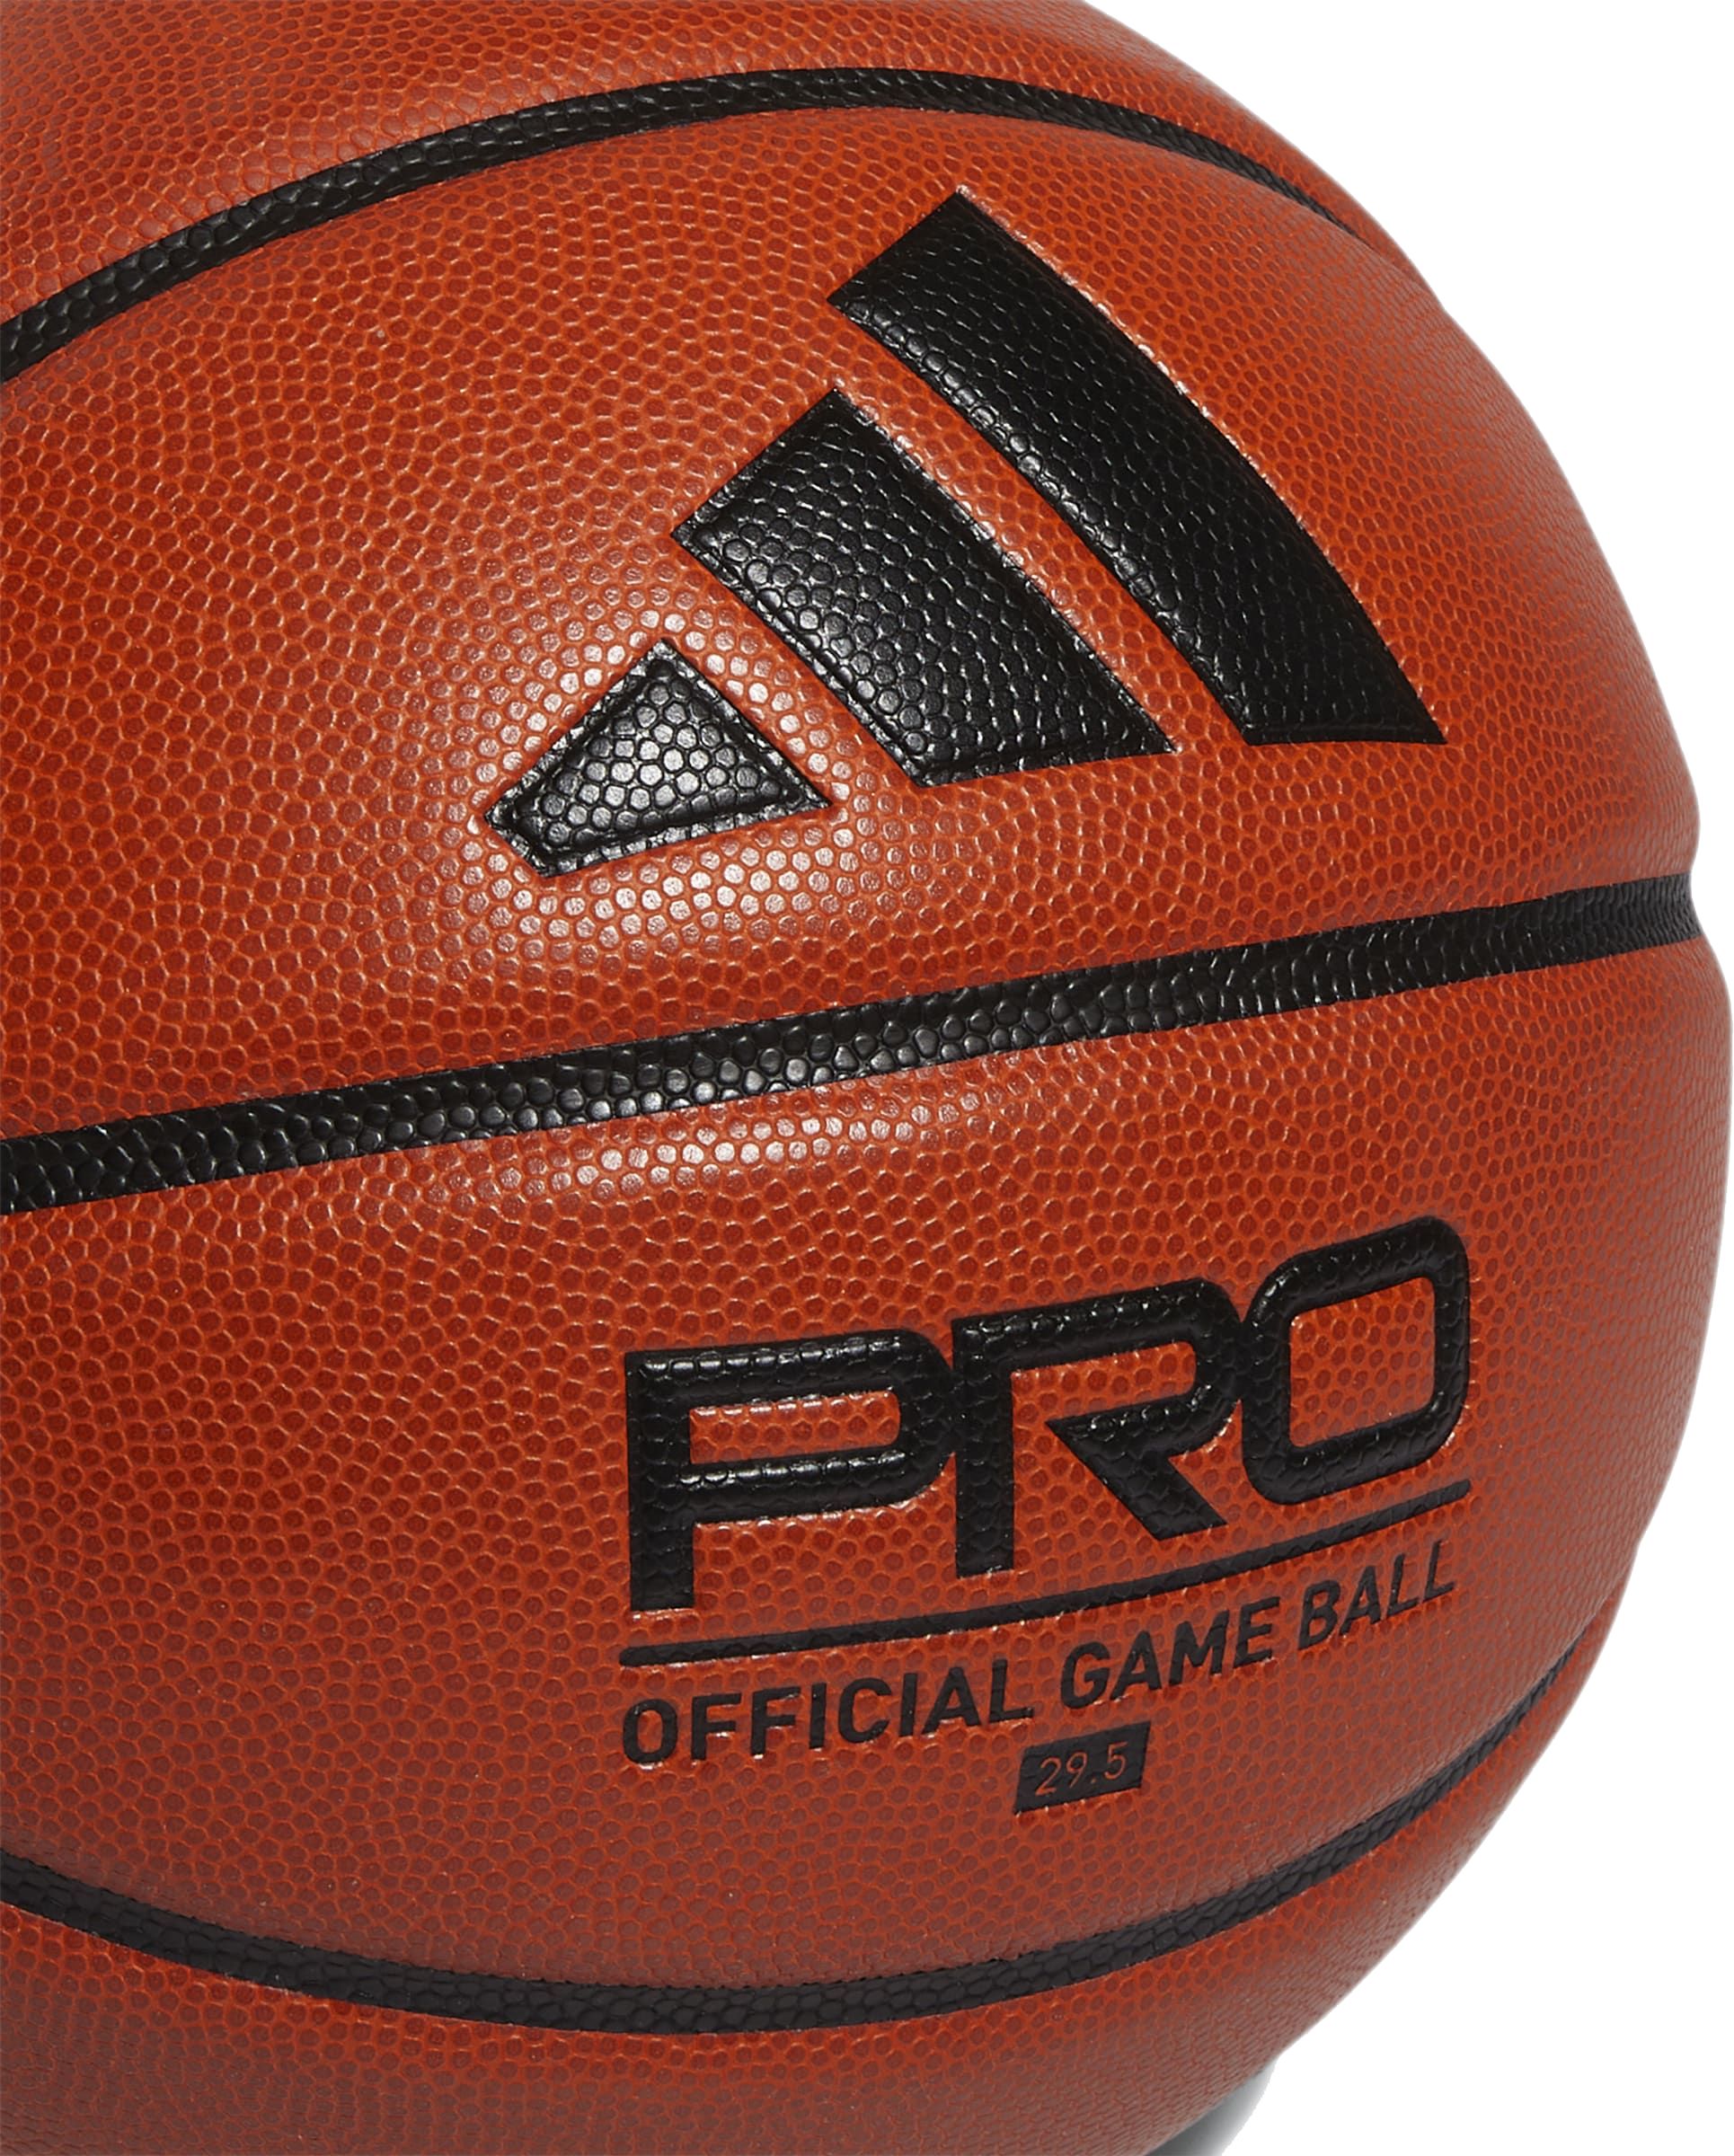 ADIDAS, Pro 3.0 Official Game Ball